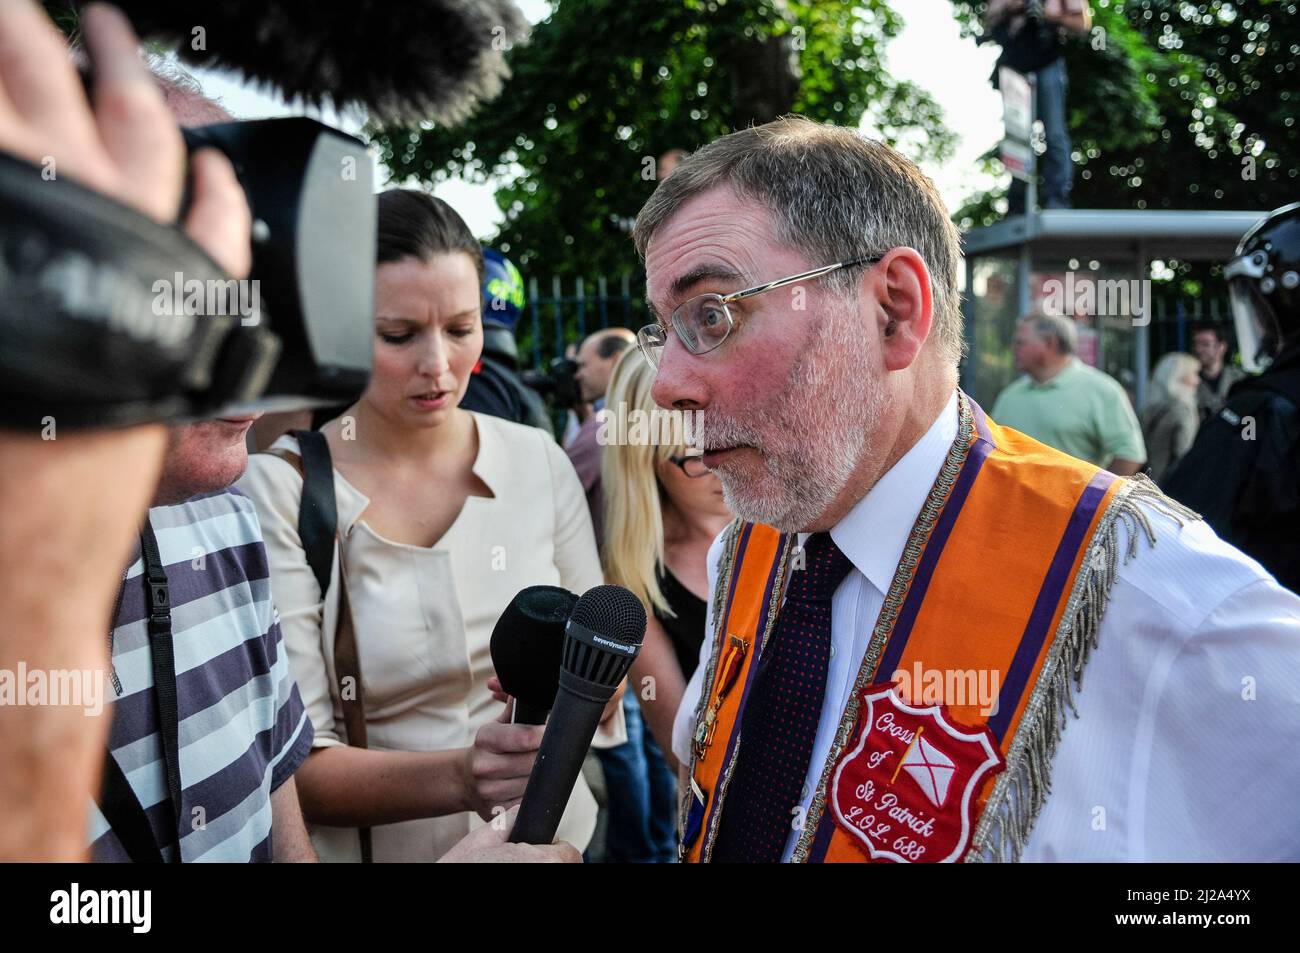 Belfast, Northern Ireland, 12th July 2013 - Nelson McCausland MLA gives a press statement after an Orange Order feeder parade was stopped by PSNI when it was clear that more than the permitted 100 supporters were attempting to march past Ardoyne shops. Stock Photo